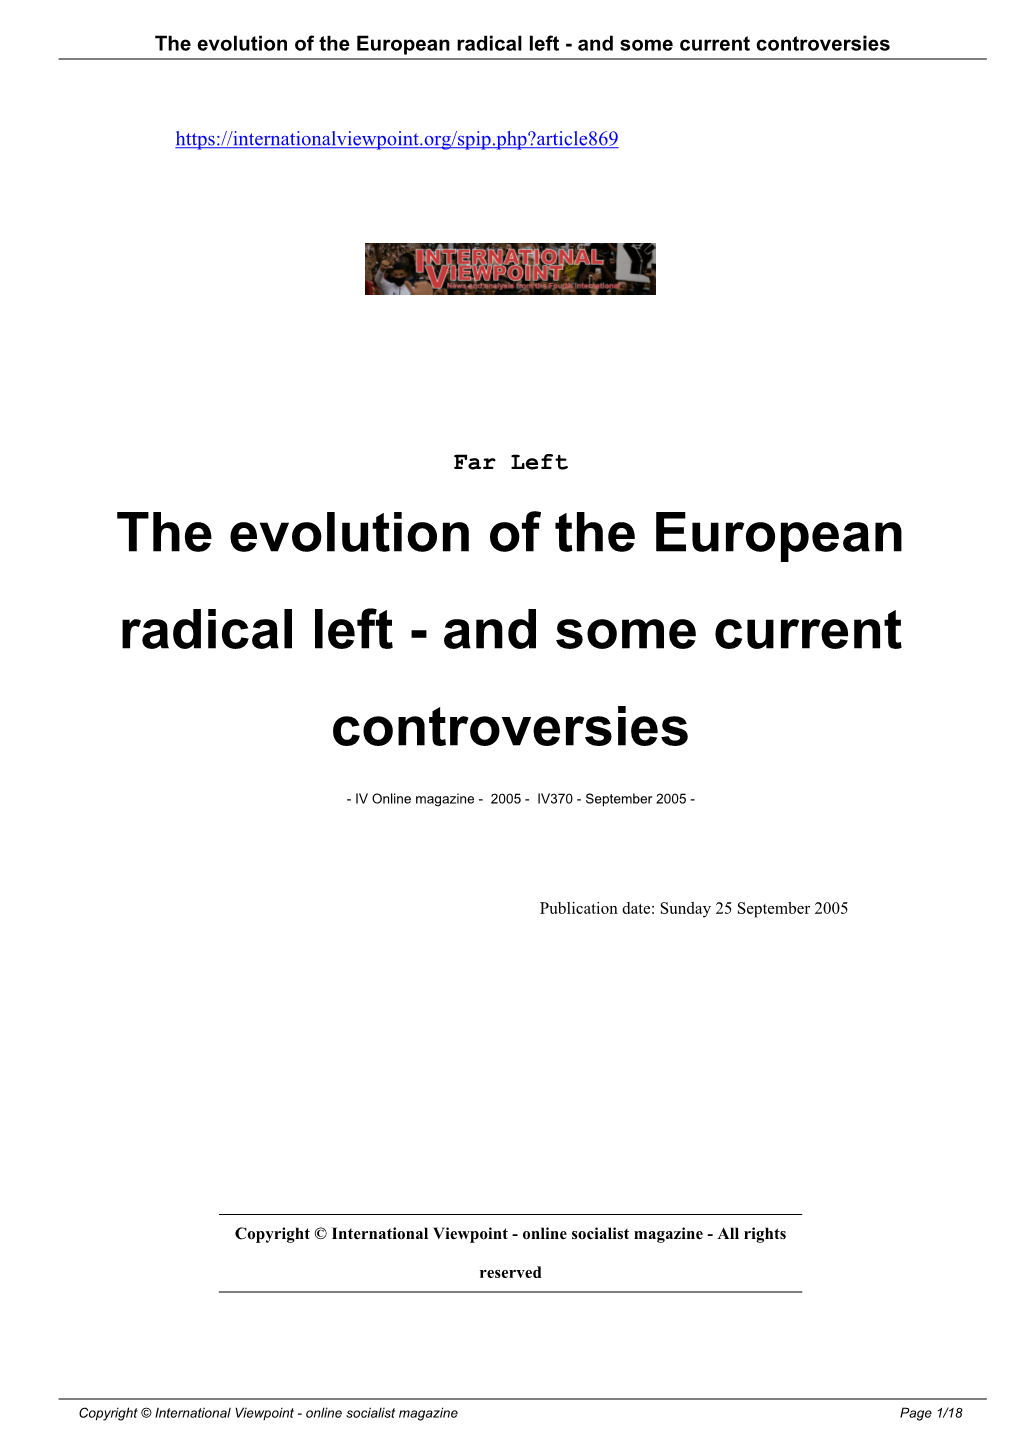 The Evolution of the European Radical Left - and Some Current Controversies